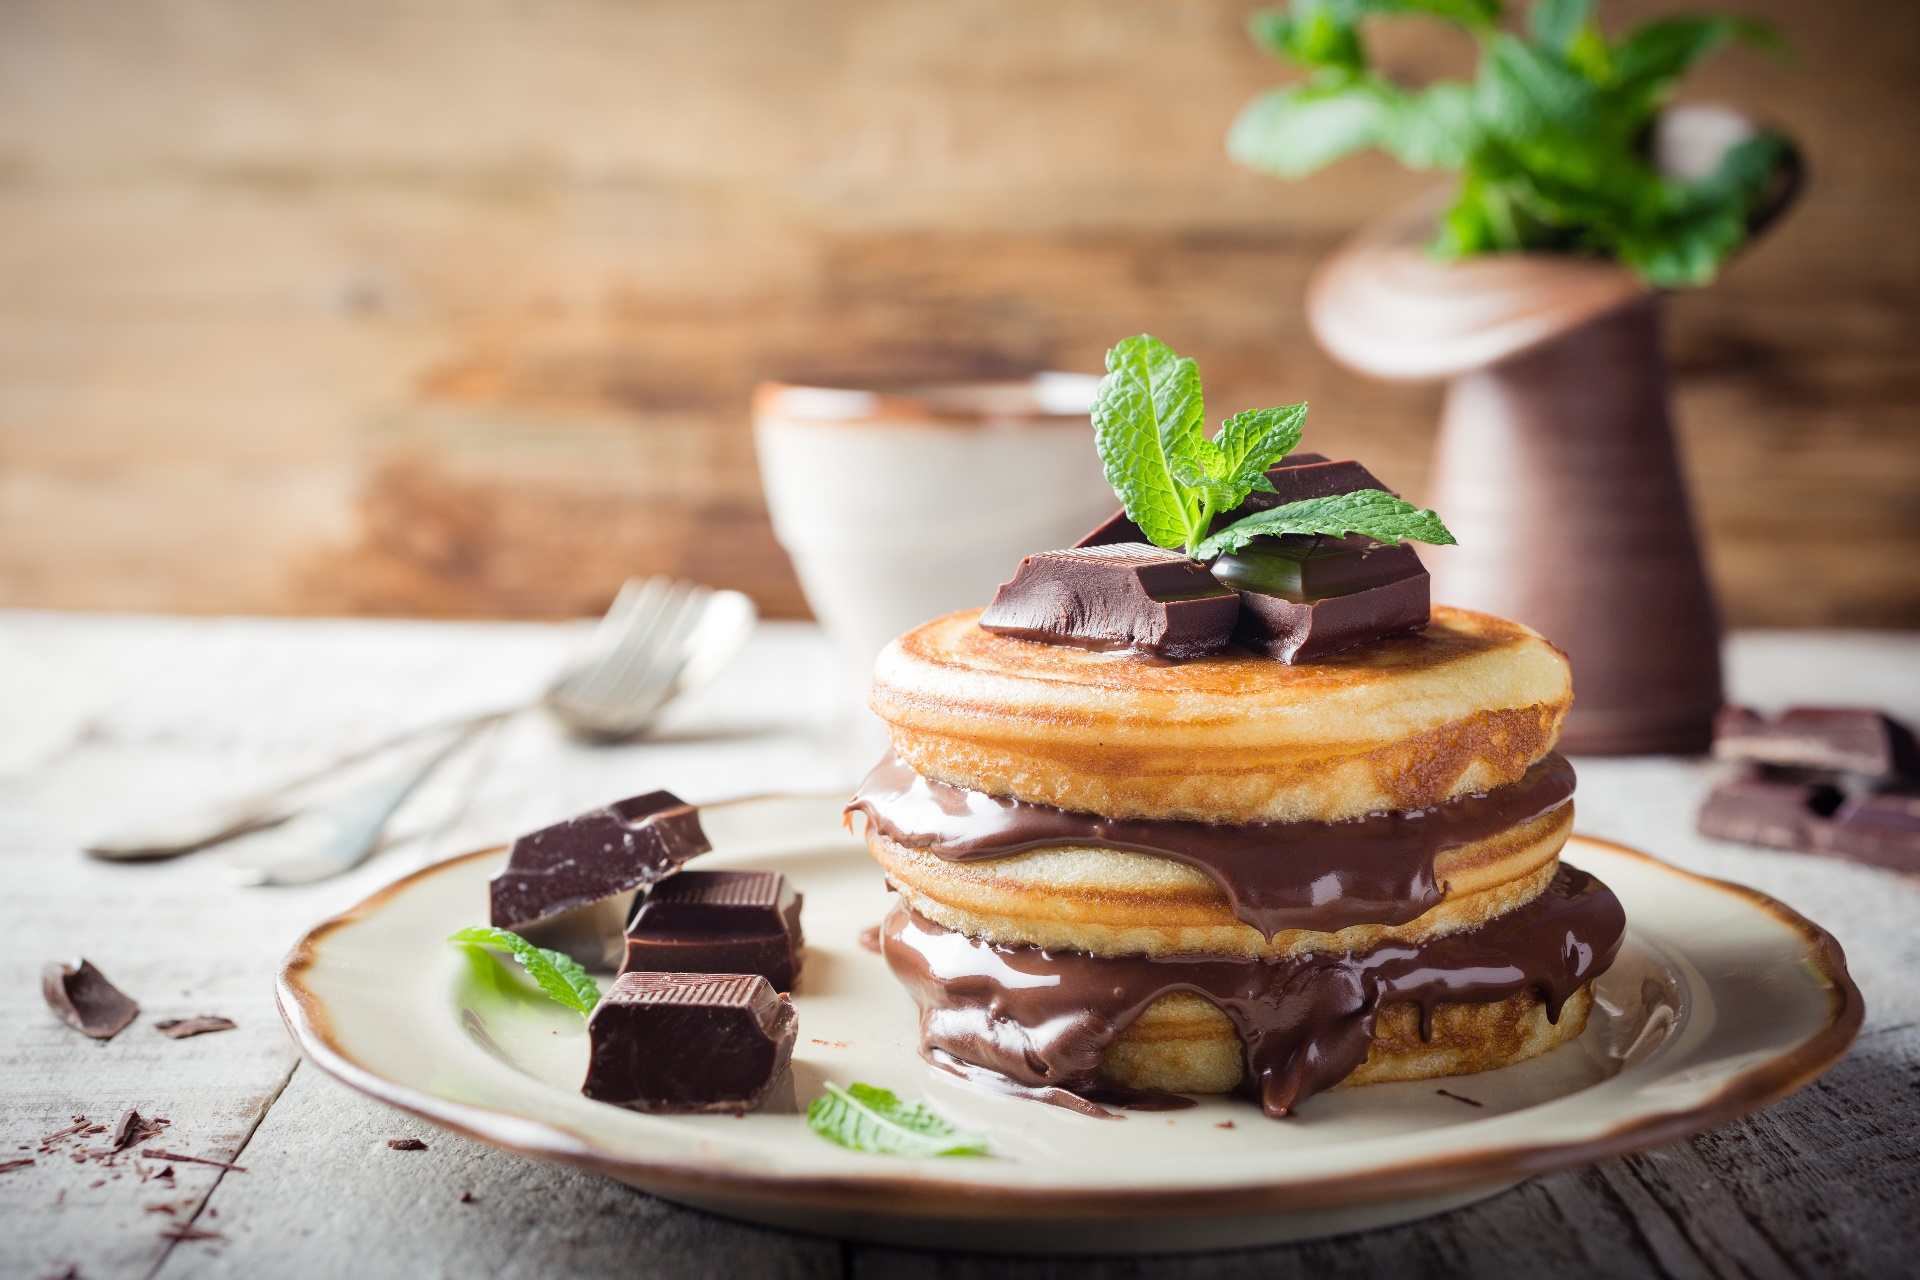 General 1920x1280 pancakes food sweets chocolate mint leaves plates fork wooden surface